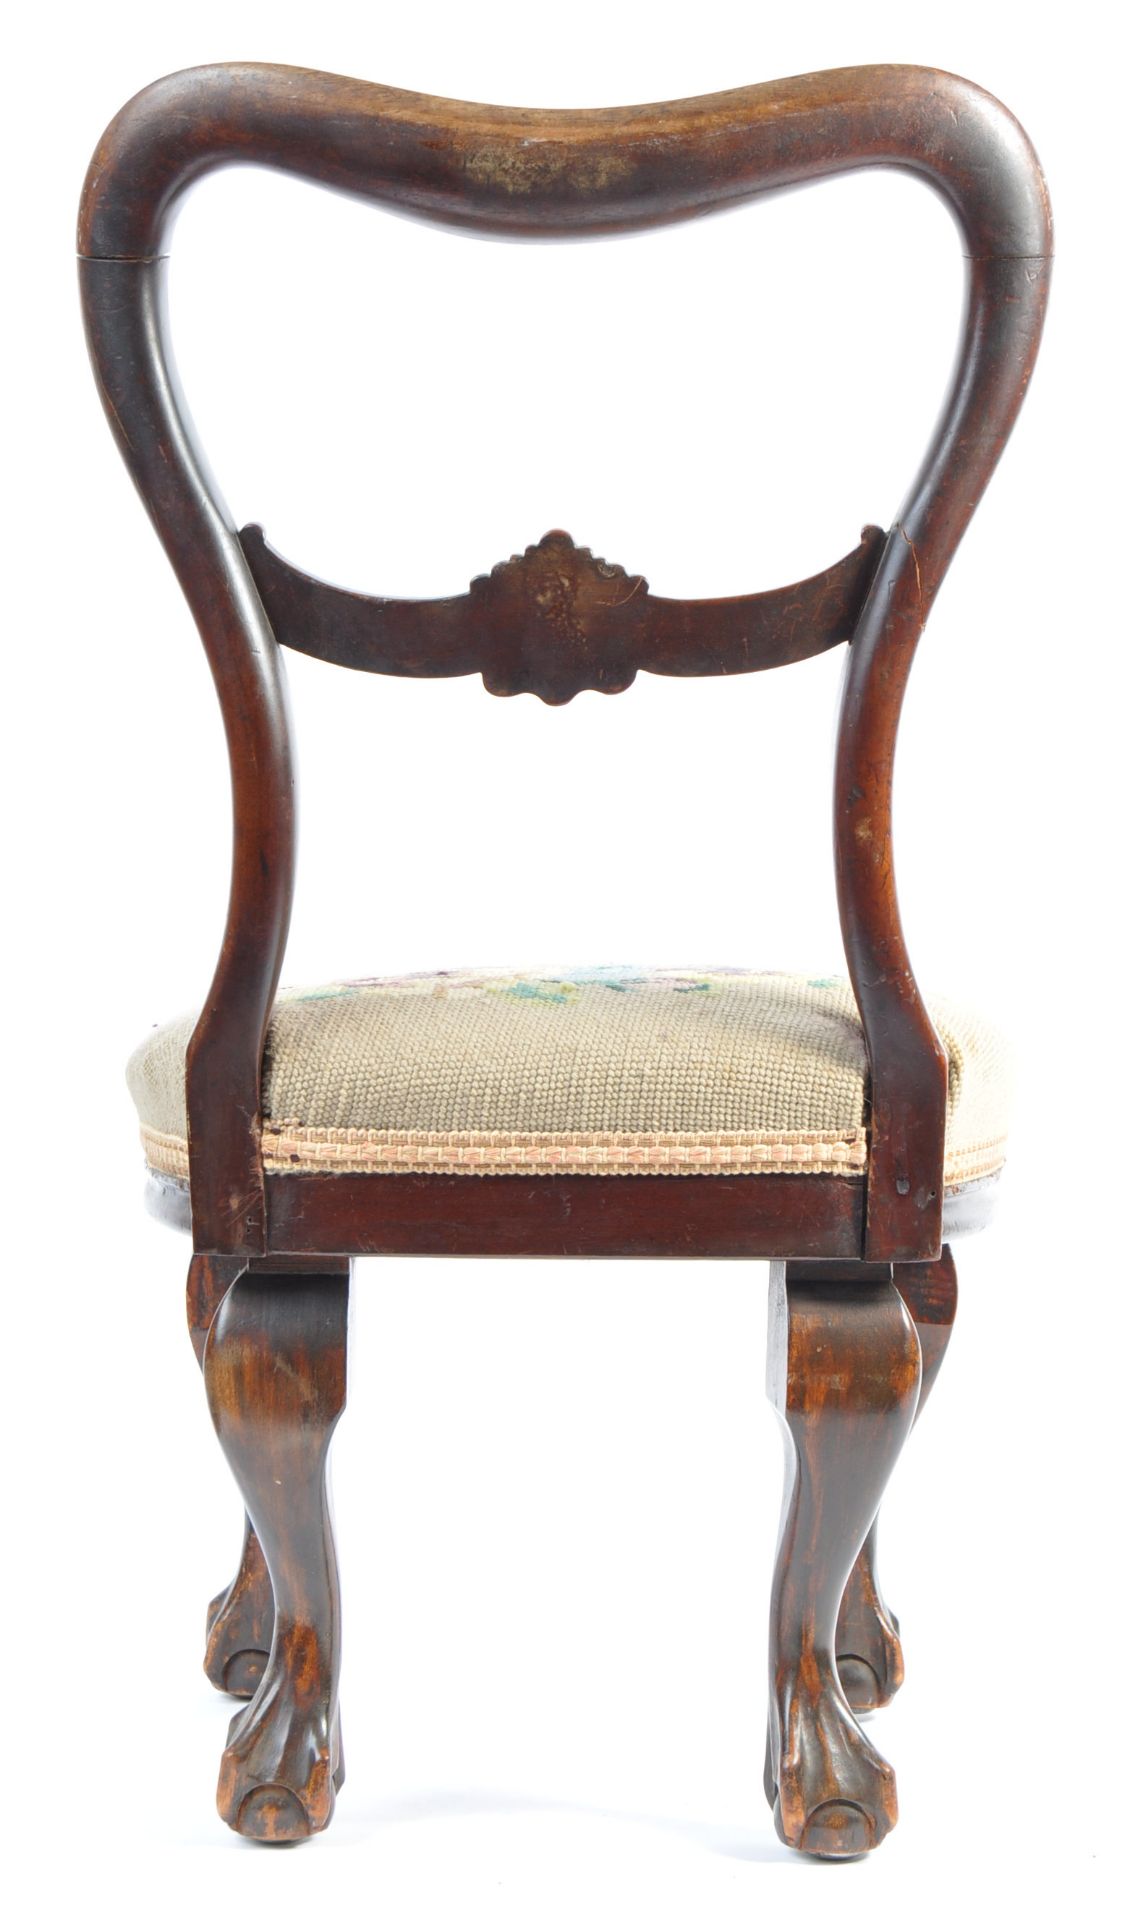 19TH CENTURY VICTORIAN MAHOGANY CHILDS CHAIR - Image 4 of 8